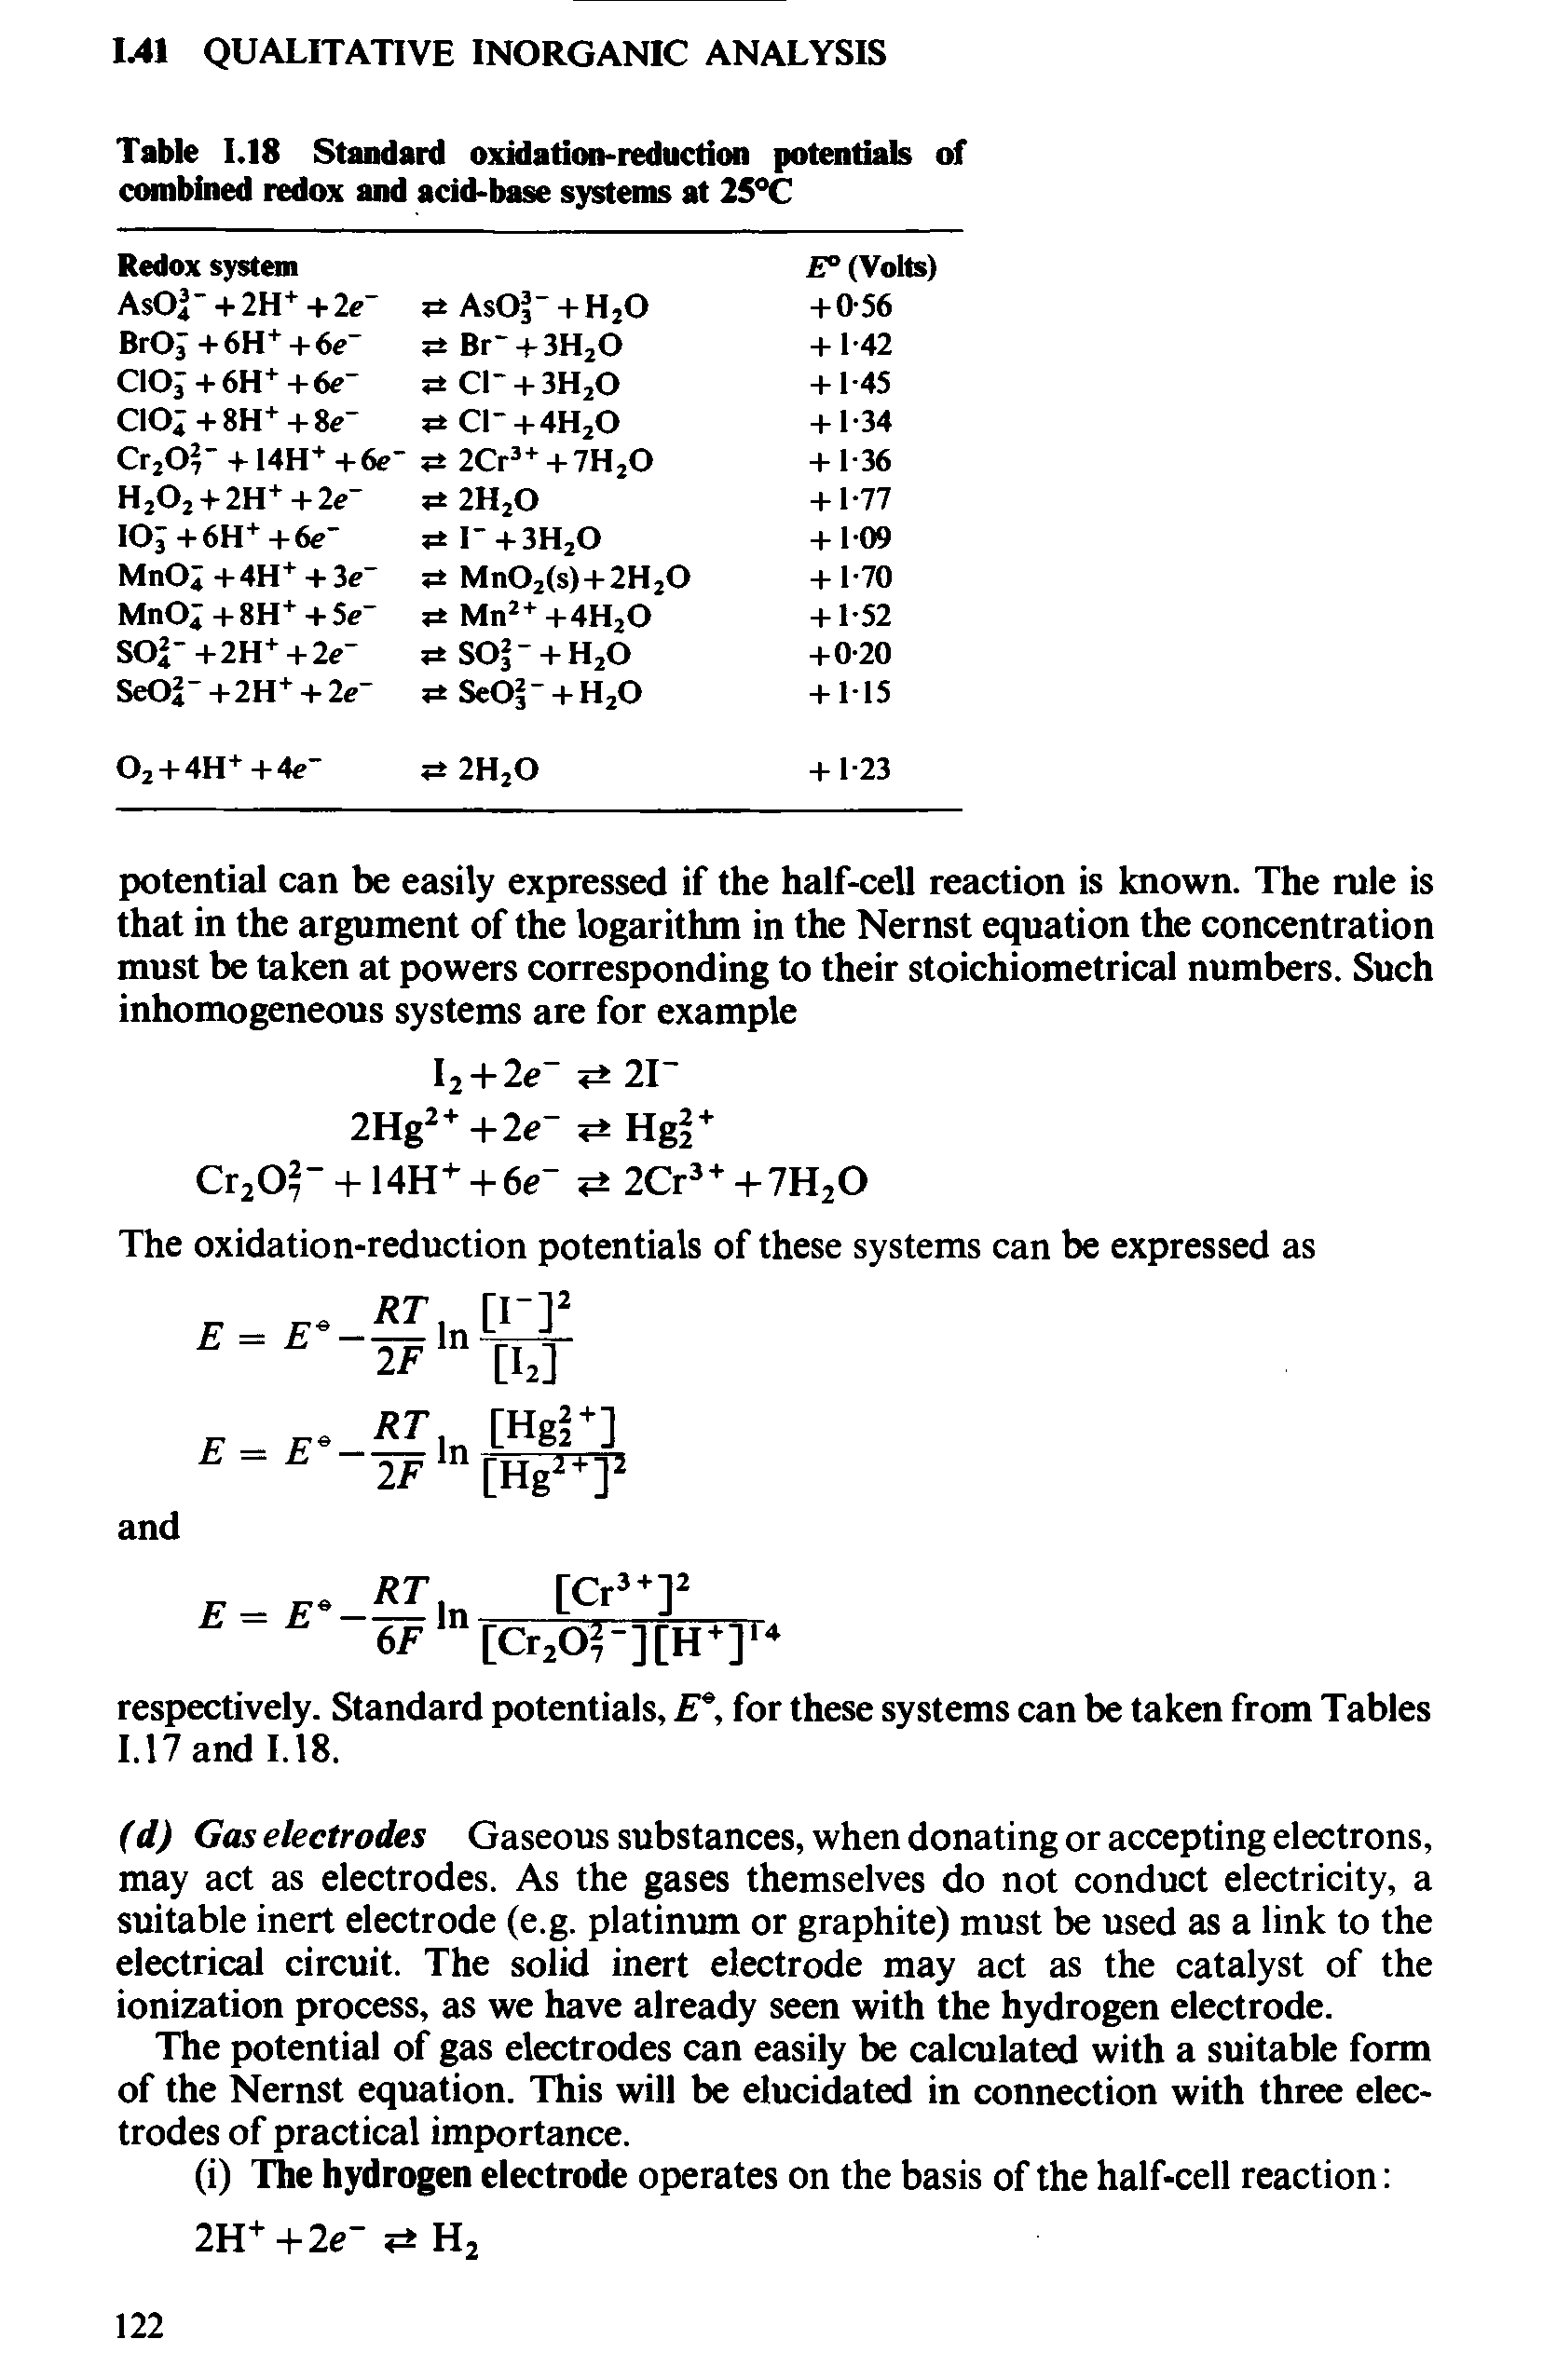 Table 1.18 Standard oxidation-reduction potentials of combined redox and acid-base systems at 25°C...